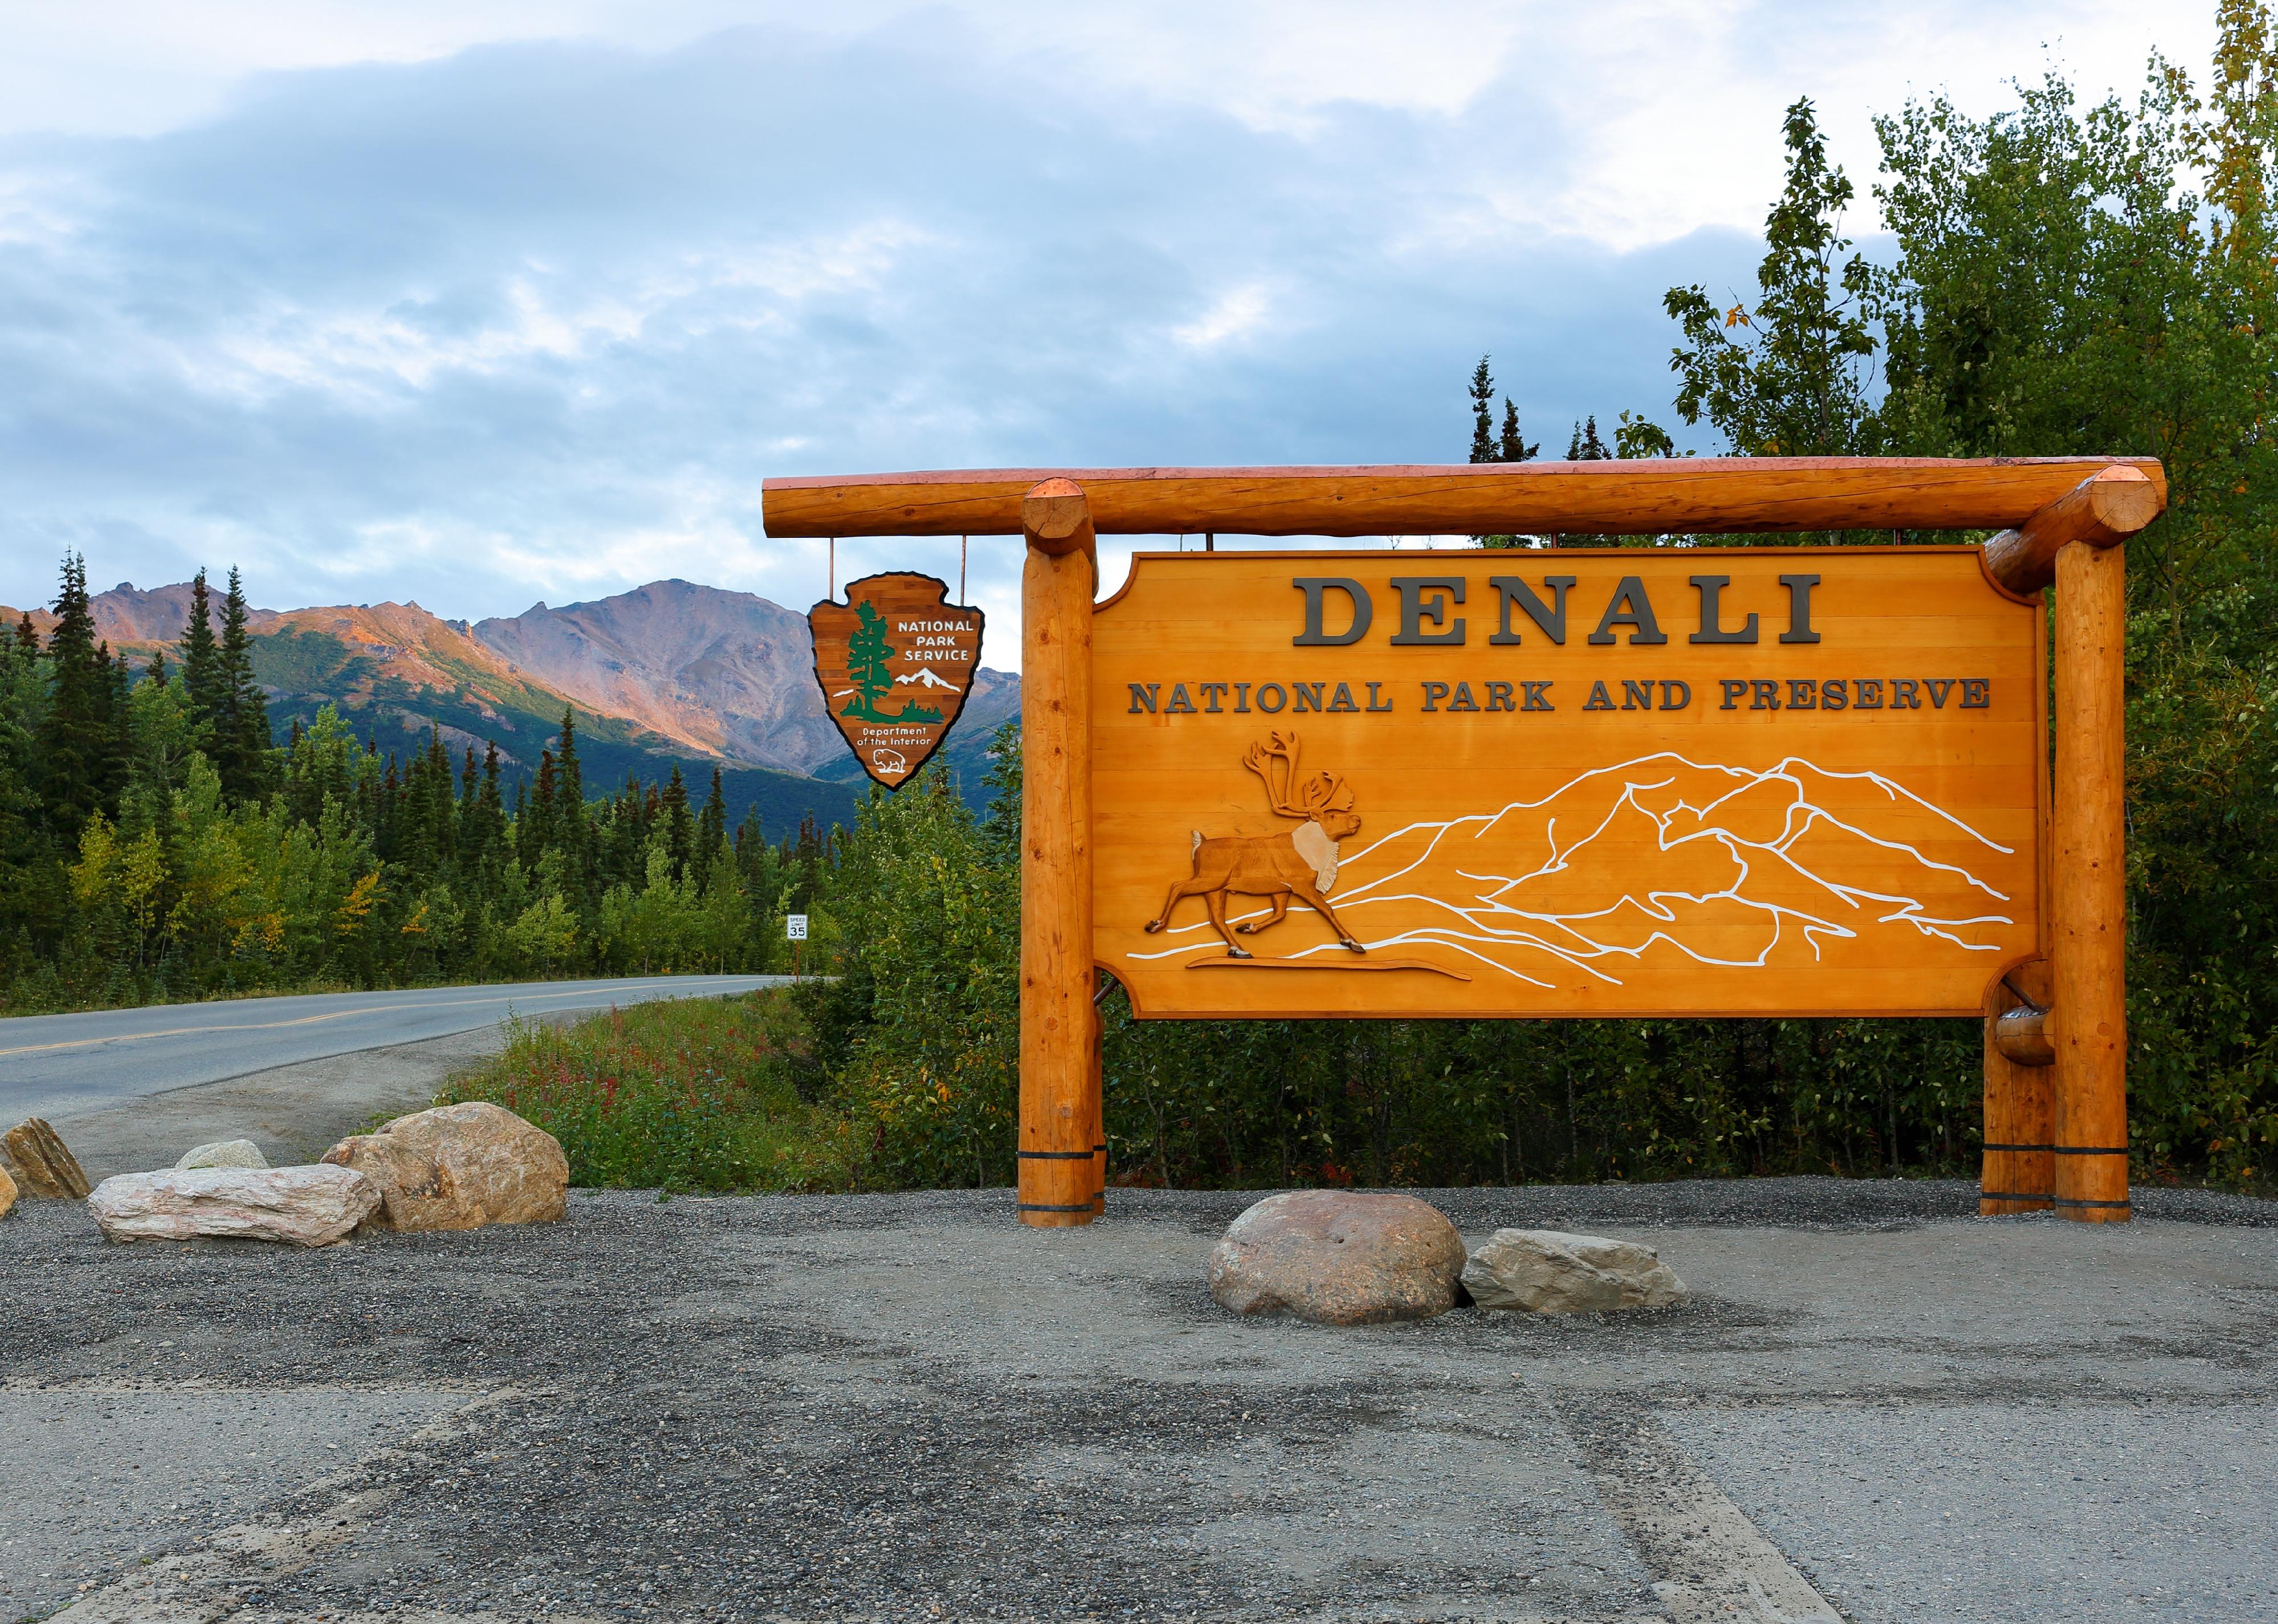 Denali National Park sign at entrance with tree and mountain.